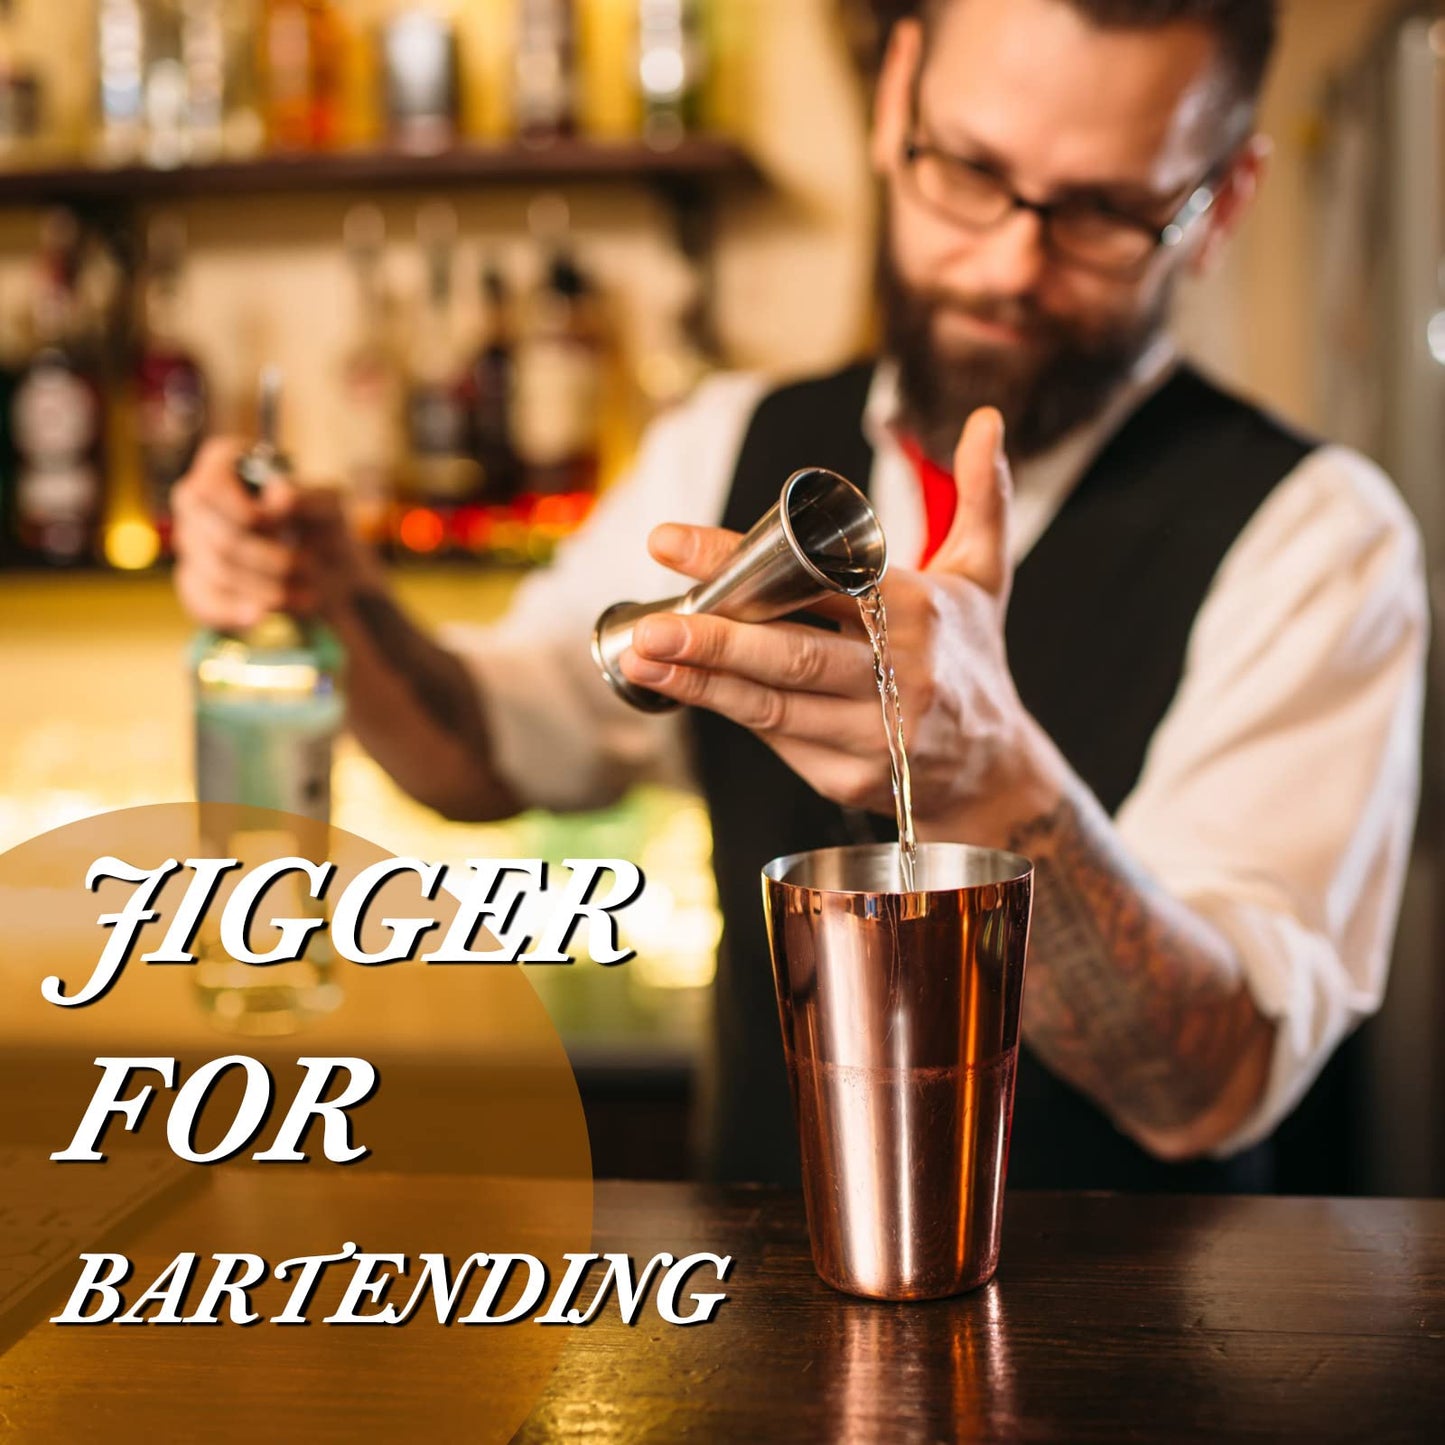 6 Pieces Jigger for Bartending Double Cocktail Japanese Jigger 2 oz 1 oz Stainless Steel Shot Glass Measuring Cup for Home Bar Drink Kitchen Bartender Tools